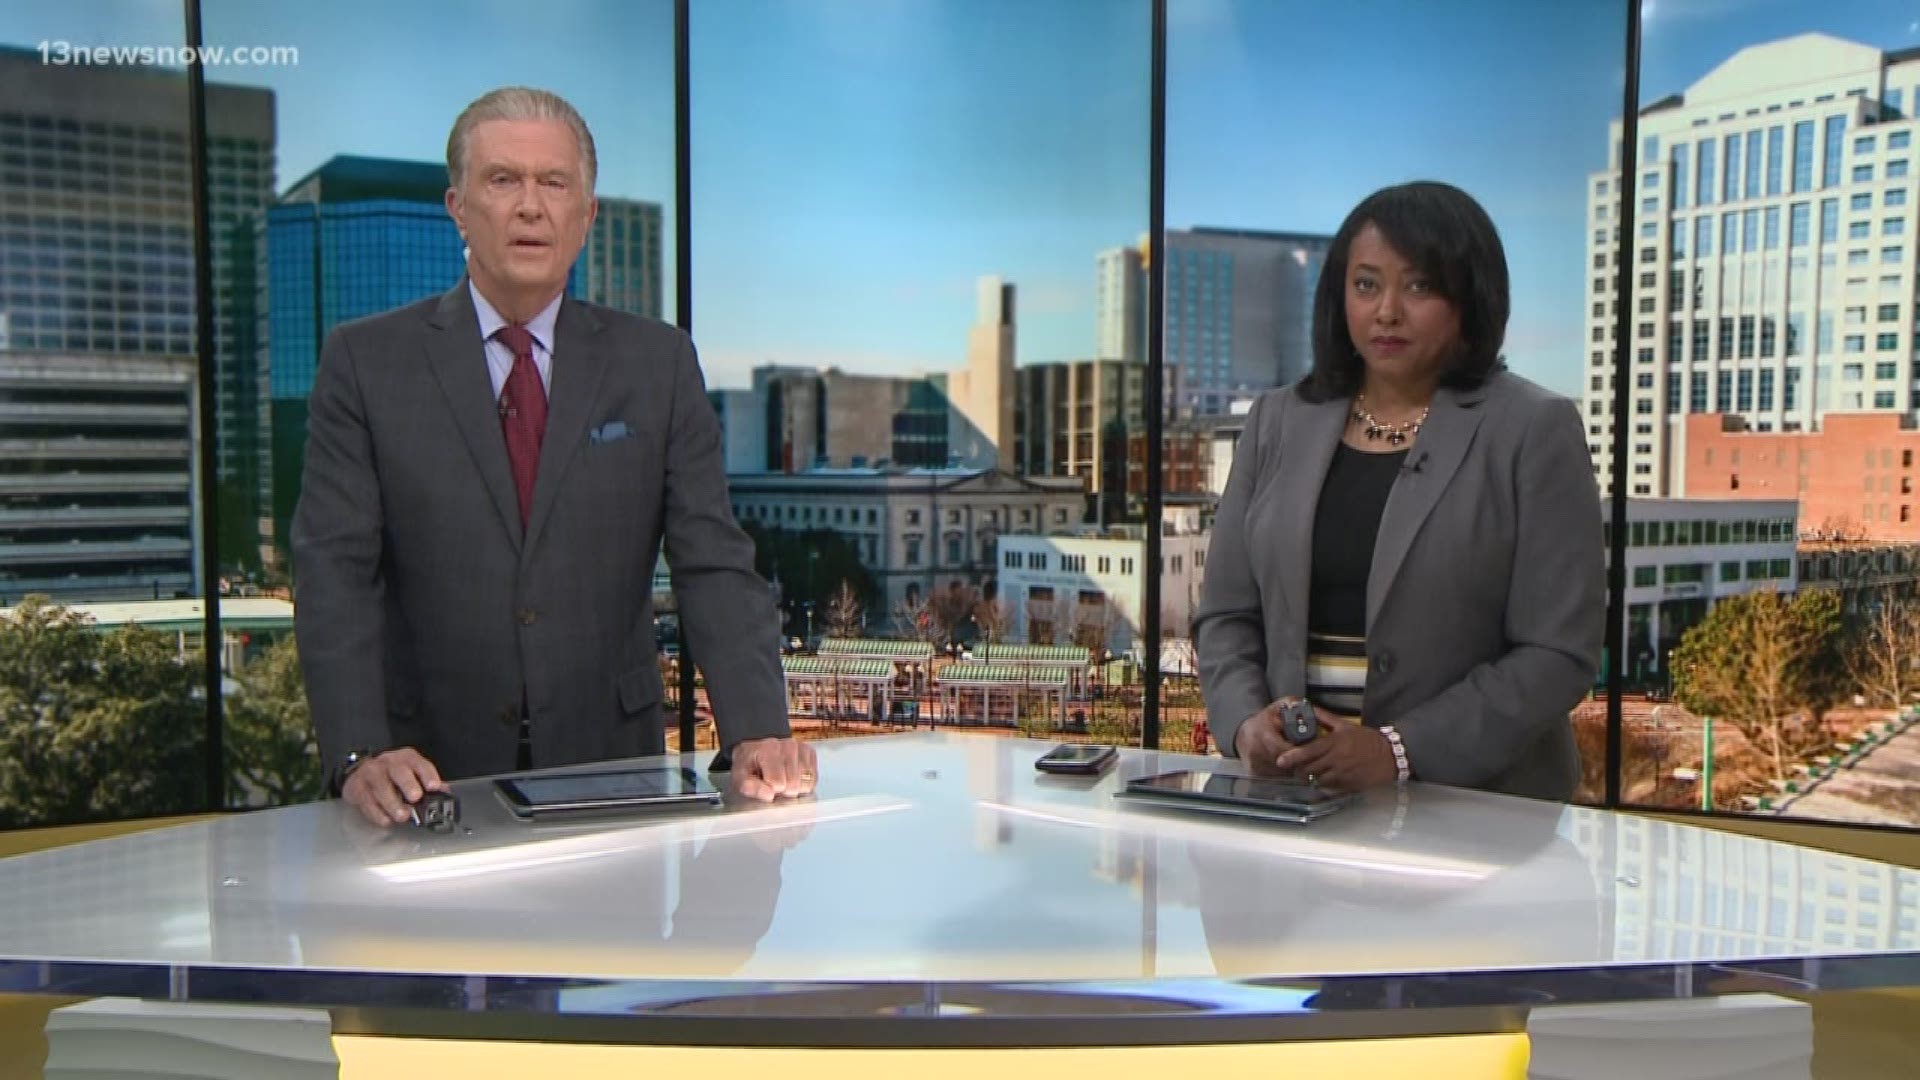 13News Now top headlines at 5 p.m. with Janet Roach and David Alan for April 23.